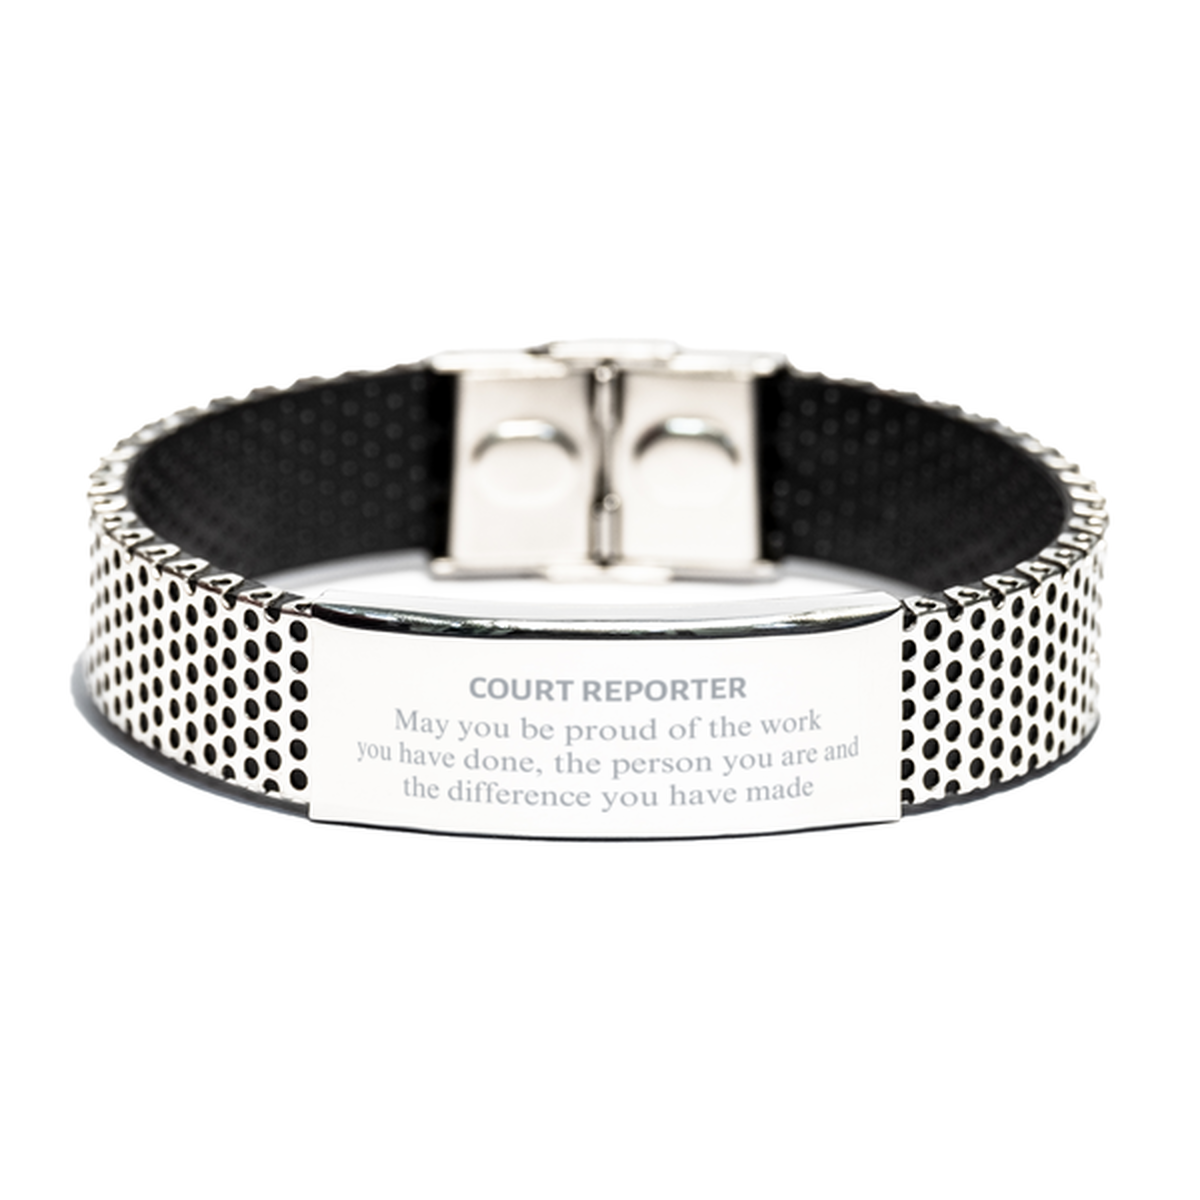 Court Reporter May you be proud of the work you have done, Retirement Court Reporter Stainless Steel Bracelet for Colleague Appreciation Gifts Amazing for Court Reporter